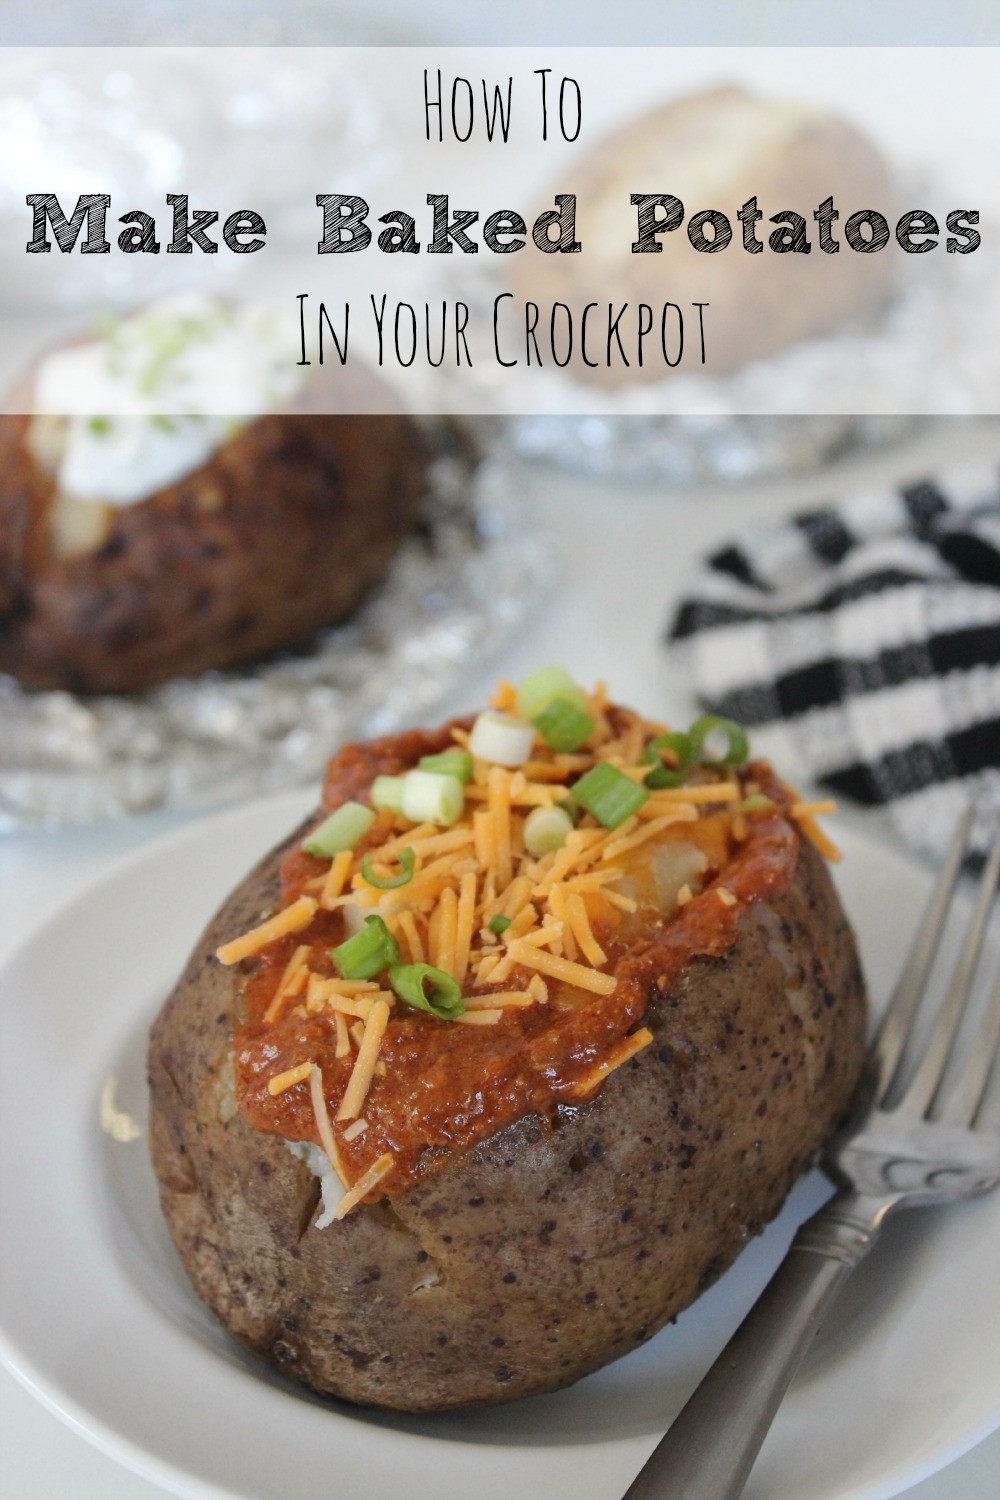 How To Cook Baked Potato
 How To Bake Potatoes in the Crockpot Moms Need To Know